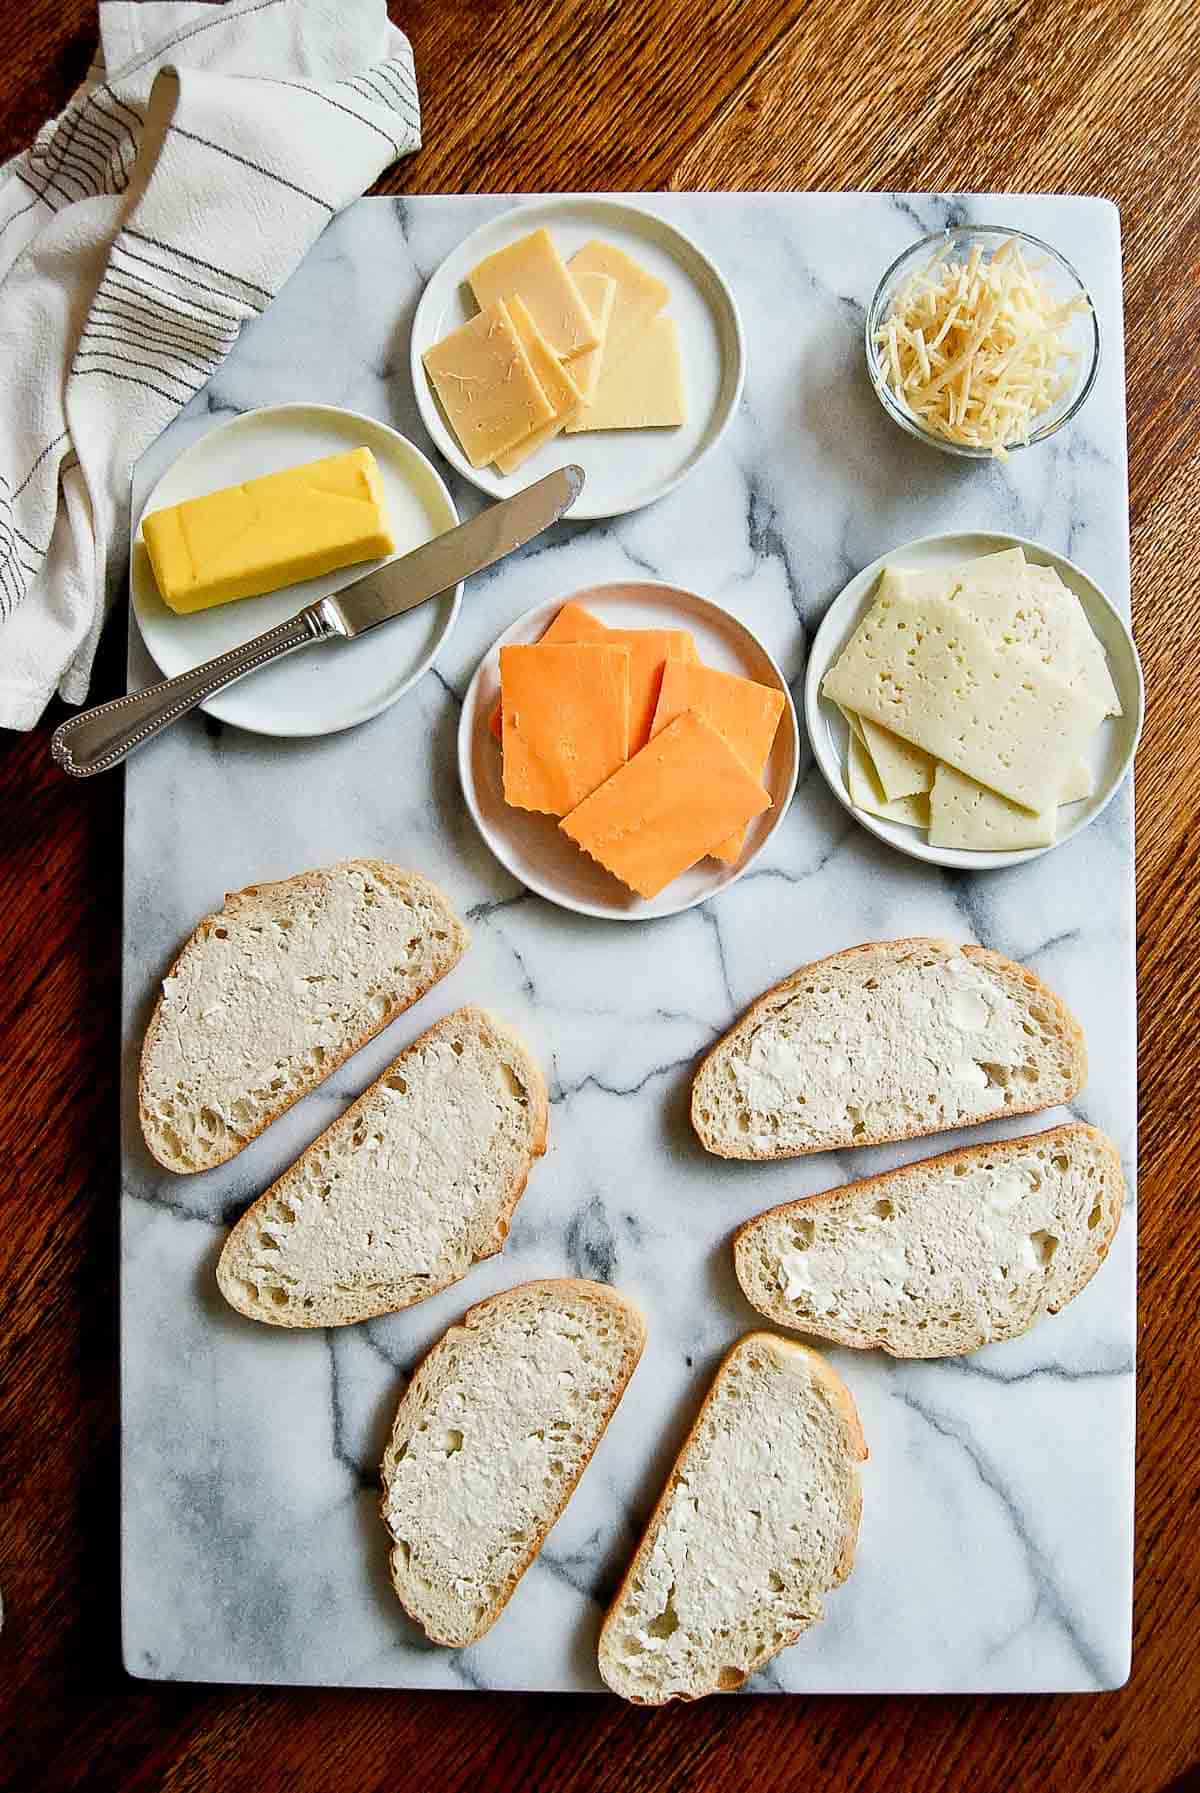 buttered bread on a marble cutting board with slices of cheese on plates.